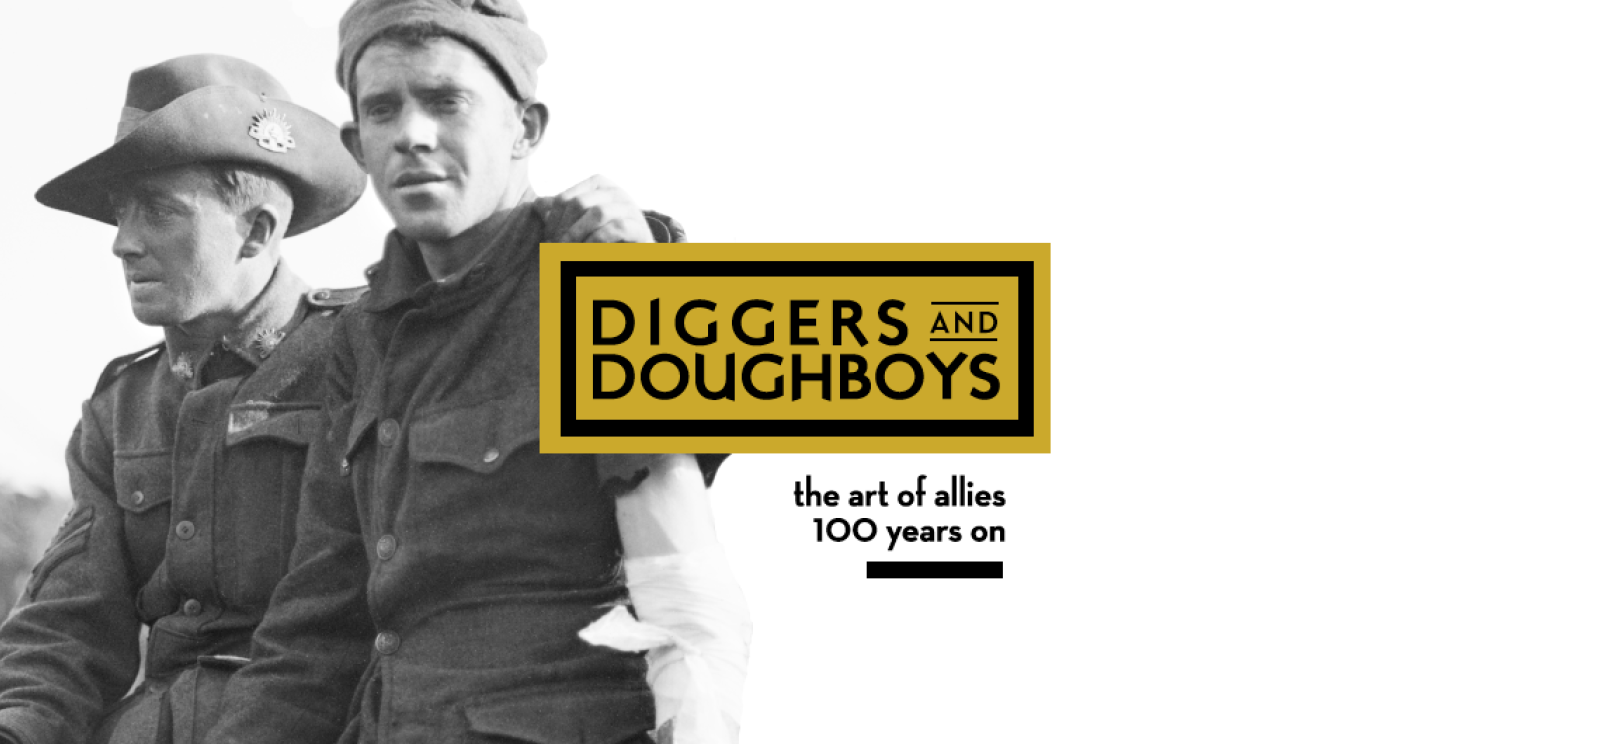 Background: Black and white photograph of two men in military combat uniform. One is wearing a wide-brimmed hat. Foreground text: Diggers and Doughboys